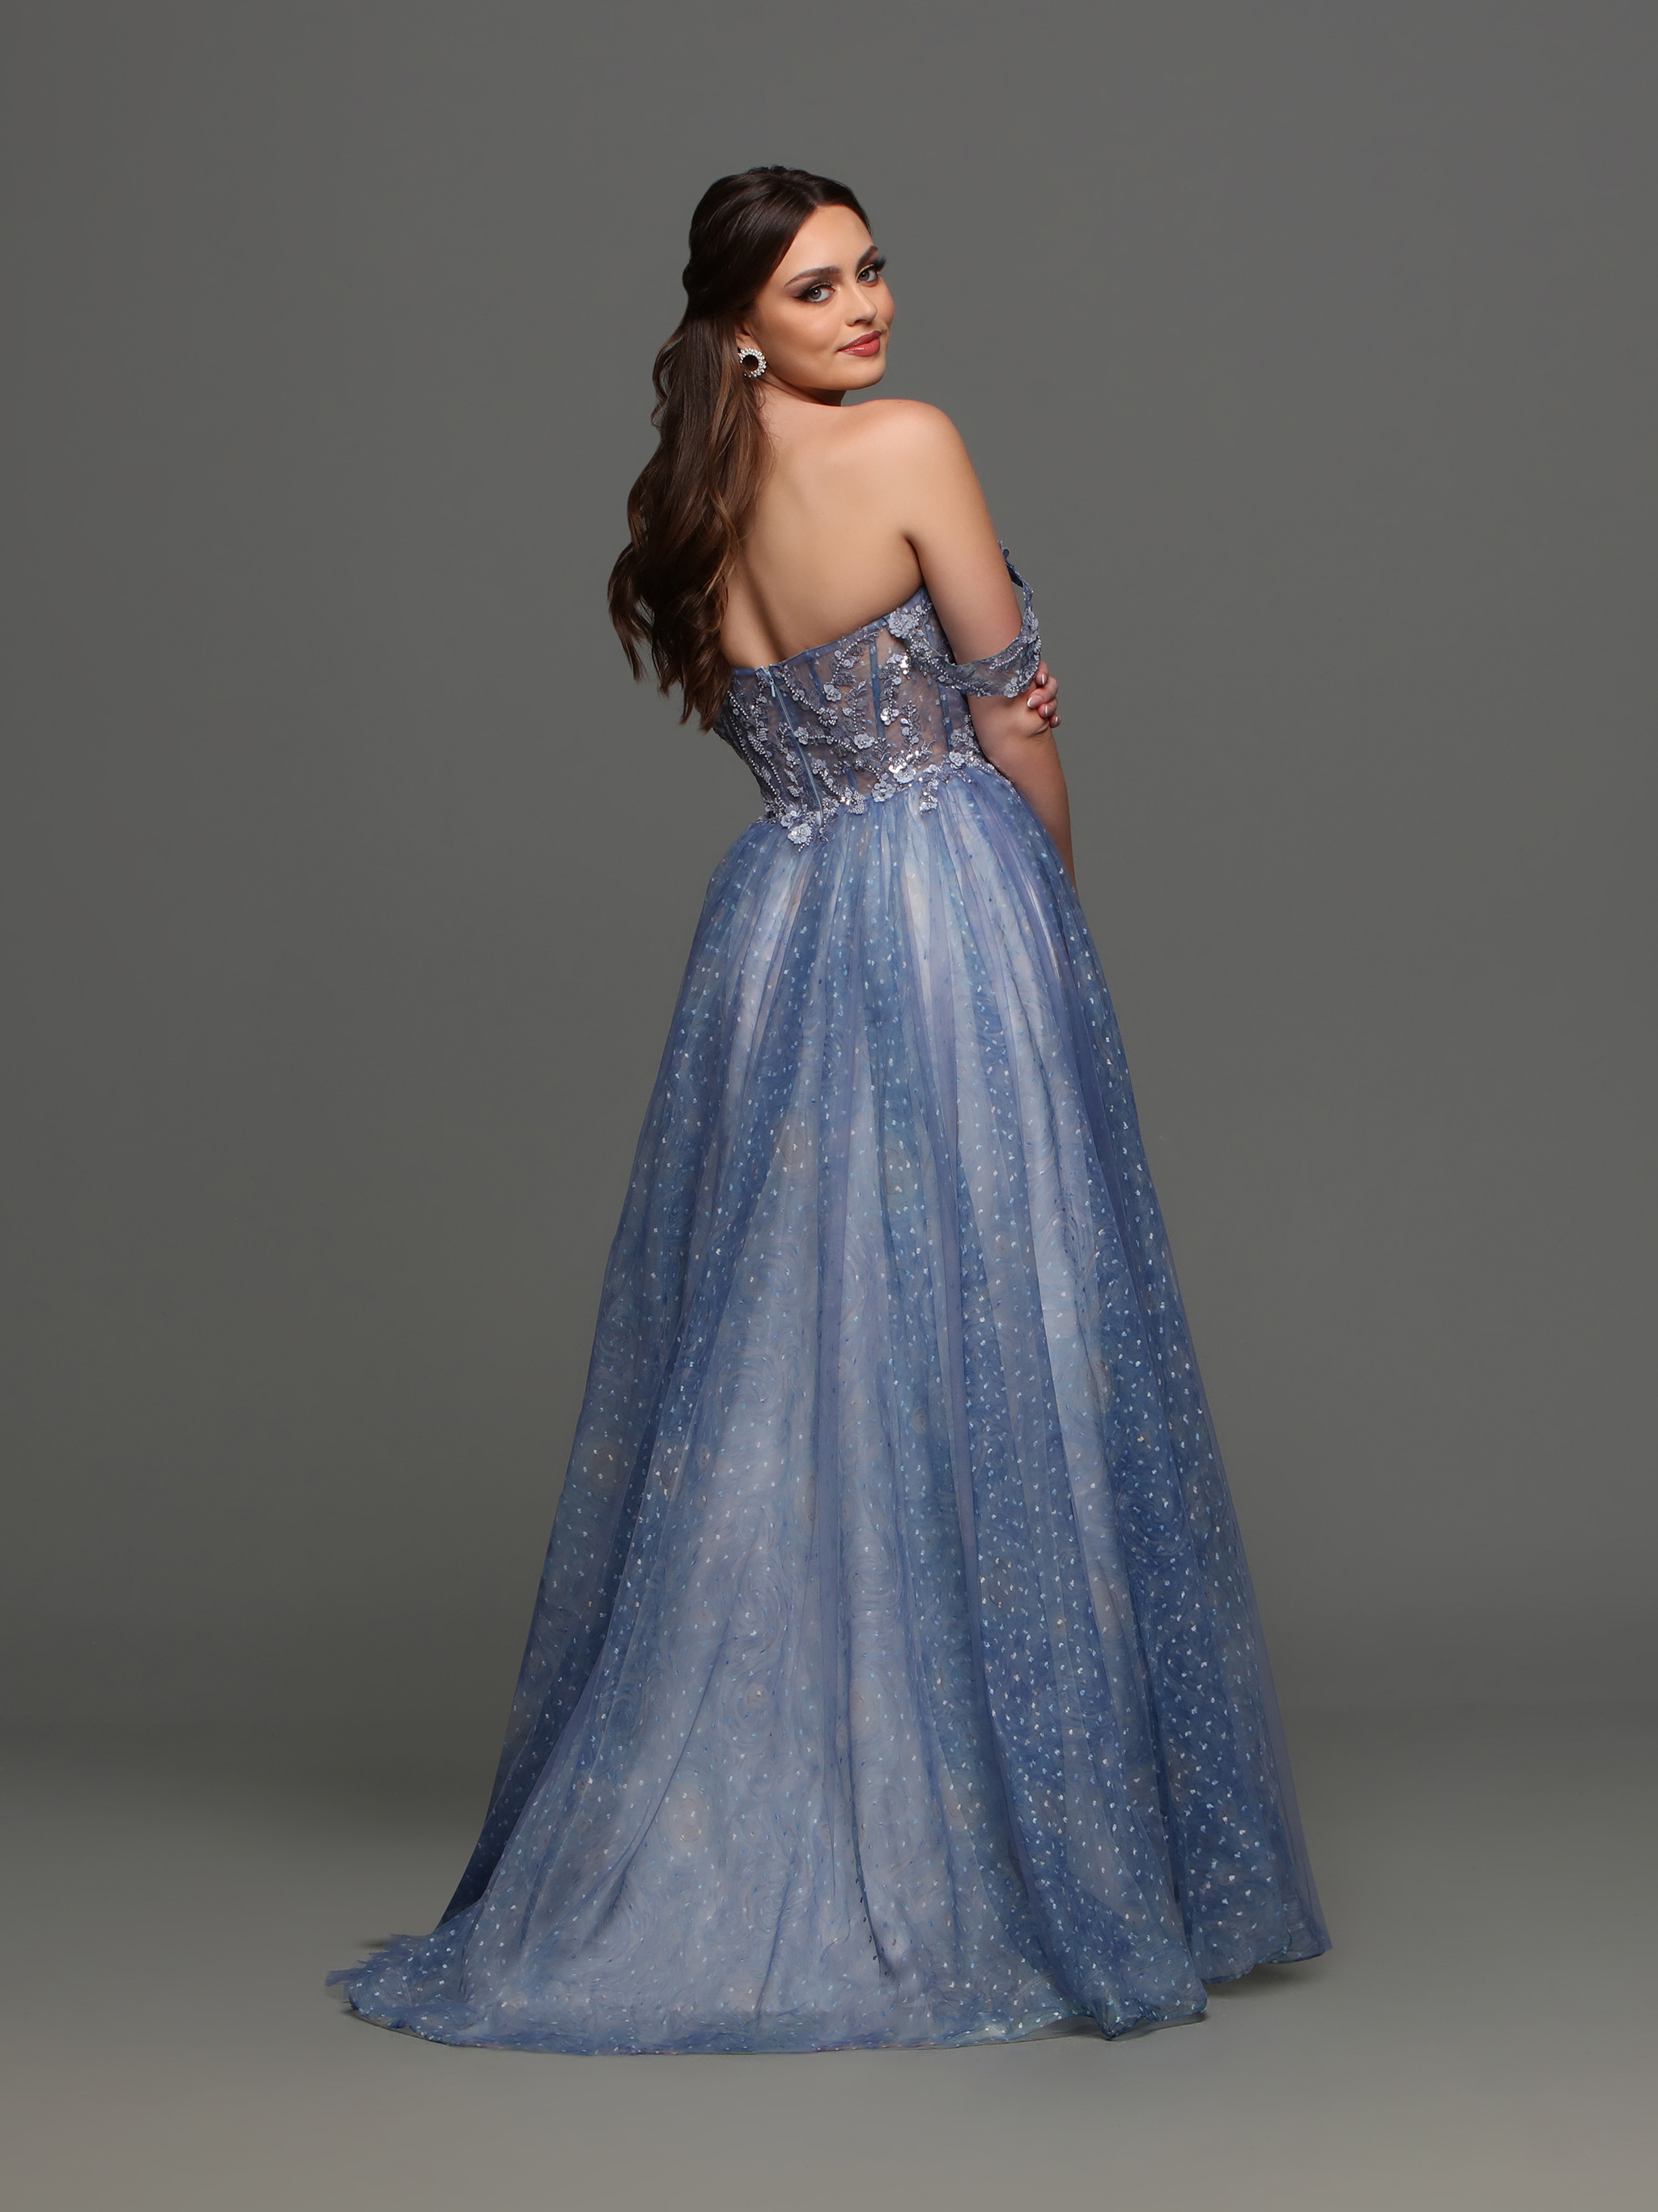 Image showing back view of style #72319